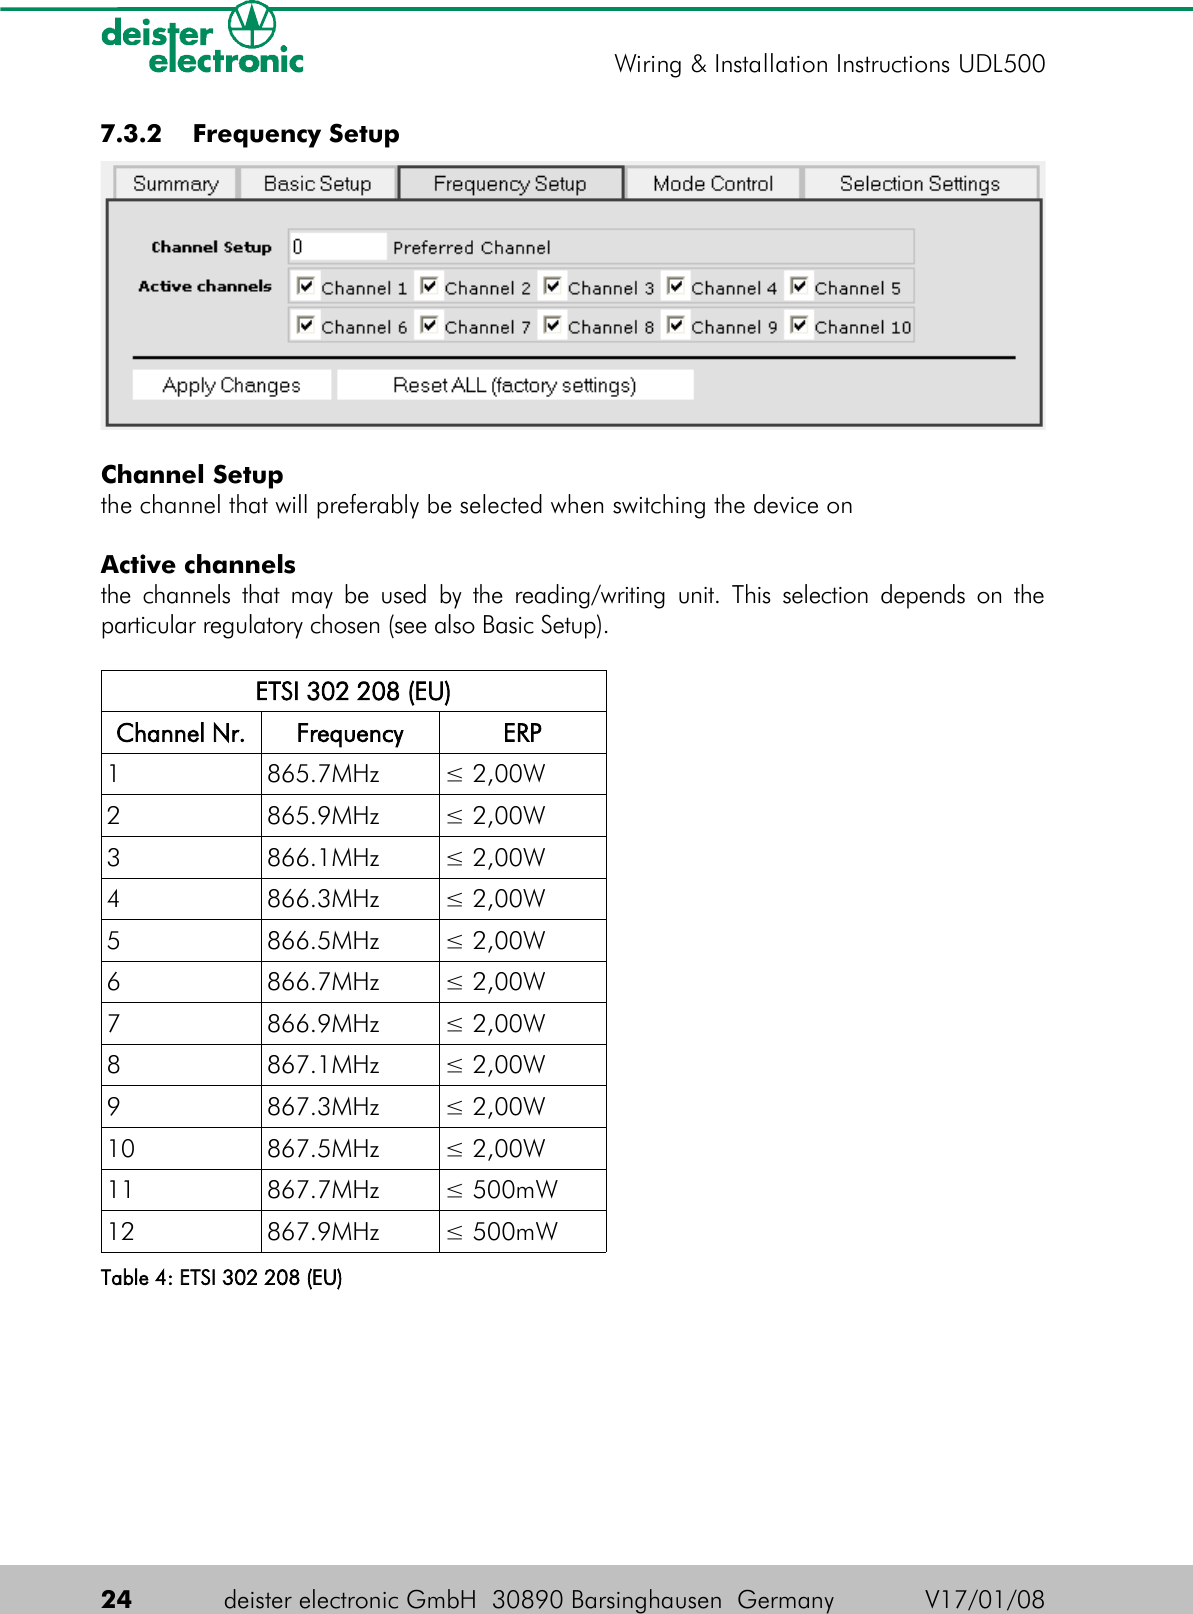  7.3.2  Frequency SetupChannel Setupthe channel that will preferably be selected when switching the device onActive channelsthe channels that may be used by the reading/writing unit. This selection depends on the particular regulatory chosen (see also Basic Setup).ETSI 302 208 (EU)Channel Nr. Frequency ERP1 865.7MHz ≤ 2,00W2 865.9MHz ≤ 2,00W3 866.1MHz ≤ 2,00W4 866.3MHz ≤ 2,00W5 866.5MHz ≤ 2,00W6 866.7MHz ≤ 2,00W7 866.9MHz ≤ 2,00W8 867.1MHz ≤ 2,00W9 867.3MHz ≤ 2,00W10 867.5MHz ≤ 2,00W11 867.7MHz ≤ 500mW12 867.9MHz ≤ 500mWTable 4: ETSI 302 208 (EU)24 deister electronic GmbH  30890 Barsinghausen  Germany V17/01/08Wiring &amp; Installation Instructions UDL500